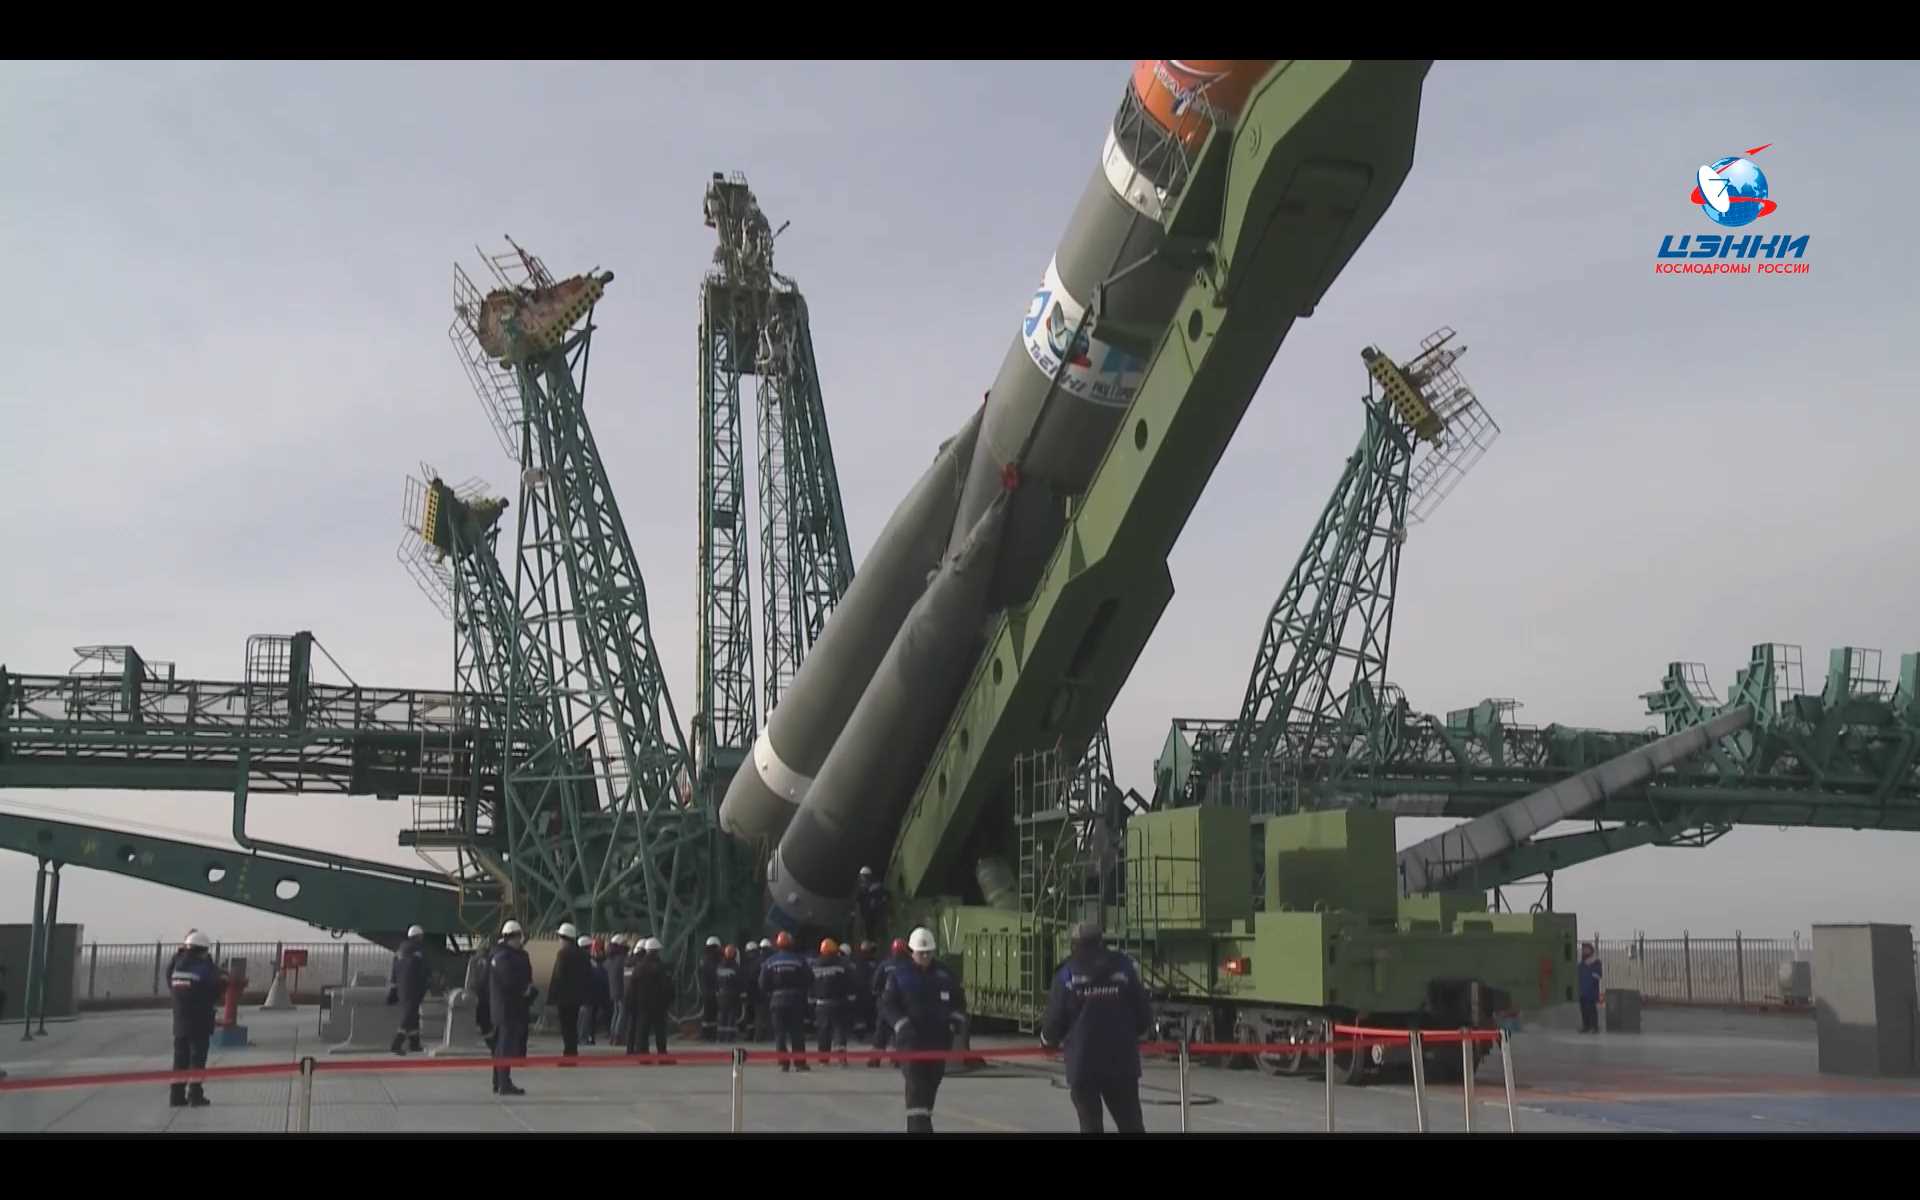 The Soyuz was supposed to lift off on March 4, 2022, but Russia's invasion of Ukraine changed things.